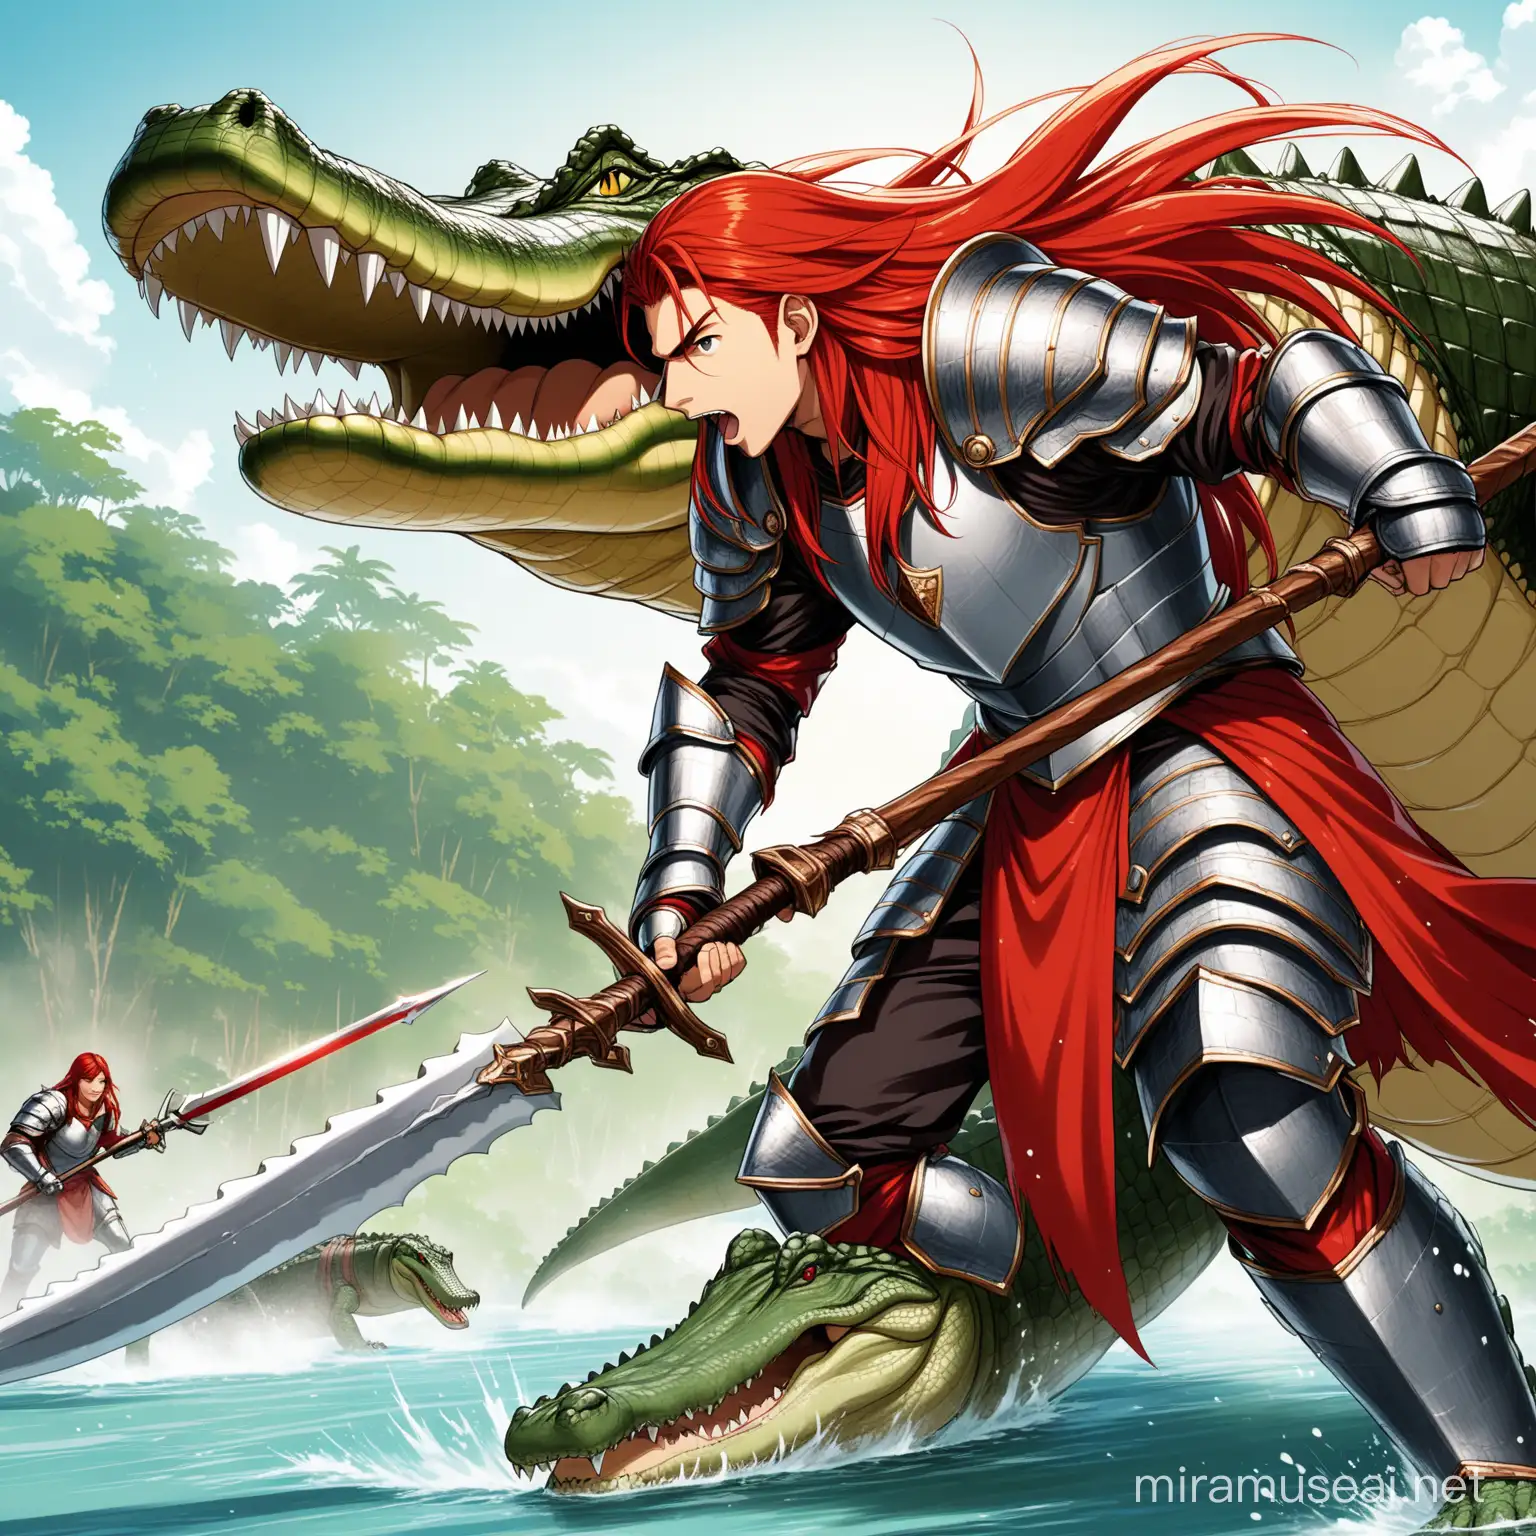 RedHaired Warrior in Armor Battles Giant Crocodile